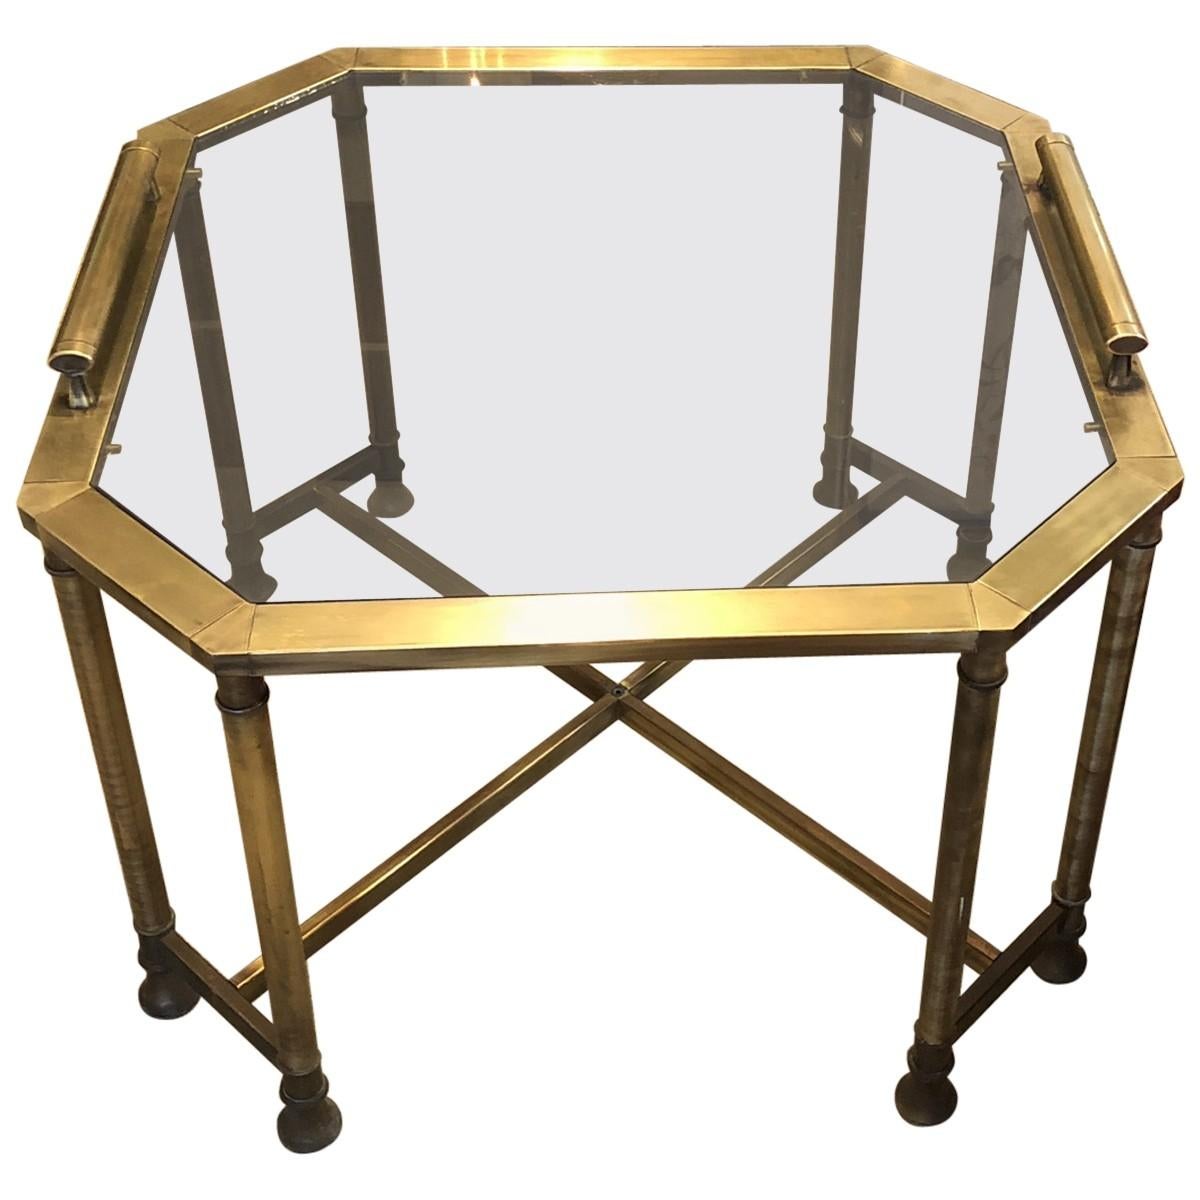 Sleek and shapely, this eye-catching pair of octagon-shaped metal coffee tables features smoked glass tops and brass finishes. Raised handles ensure these sophisticated coffee tables are every bit as functional as they are stylish.
Sold as a set of